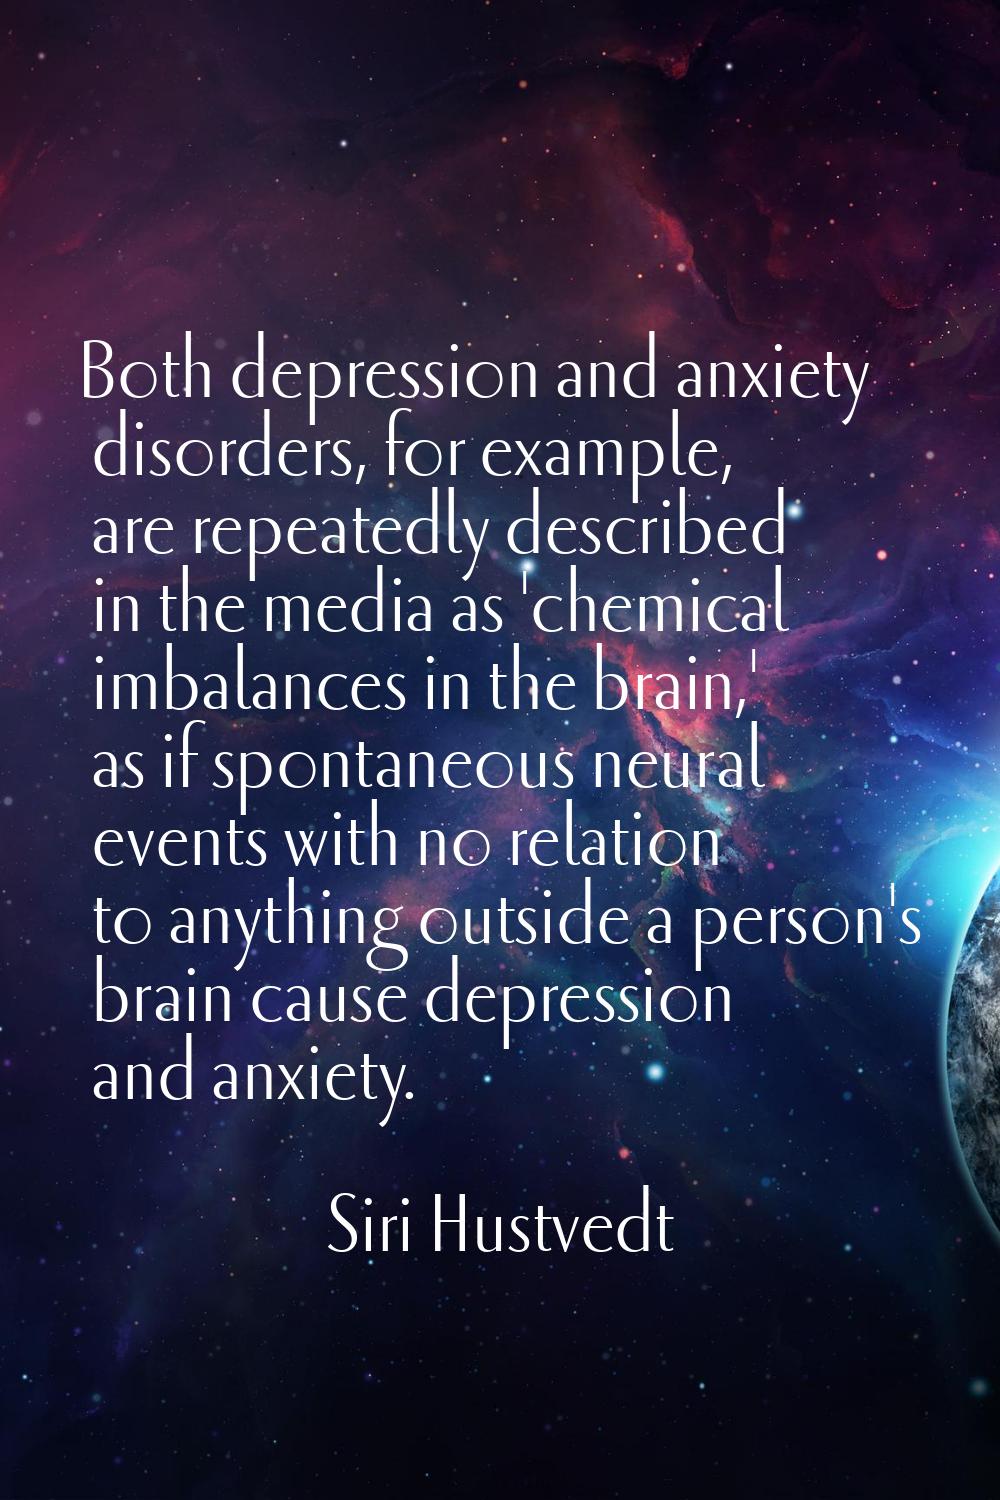 Both depression and anxiety disorders, for example, are repeatedly described in the media as 'chemi